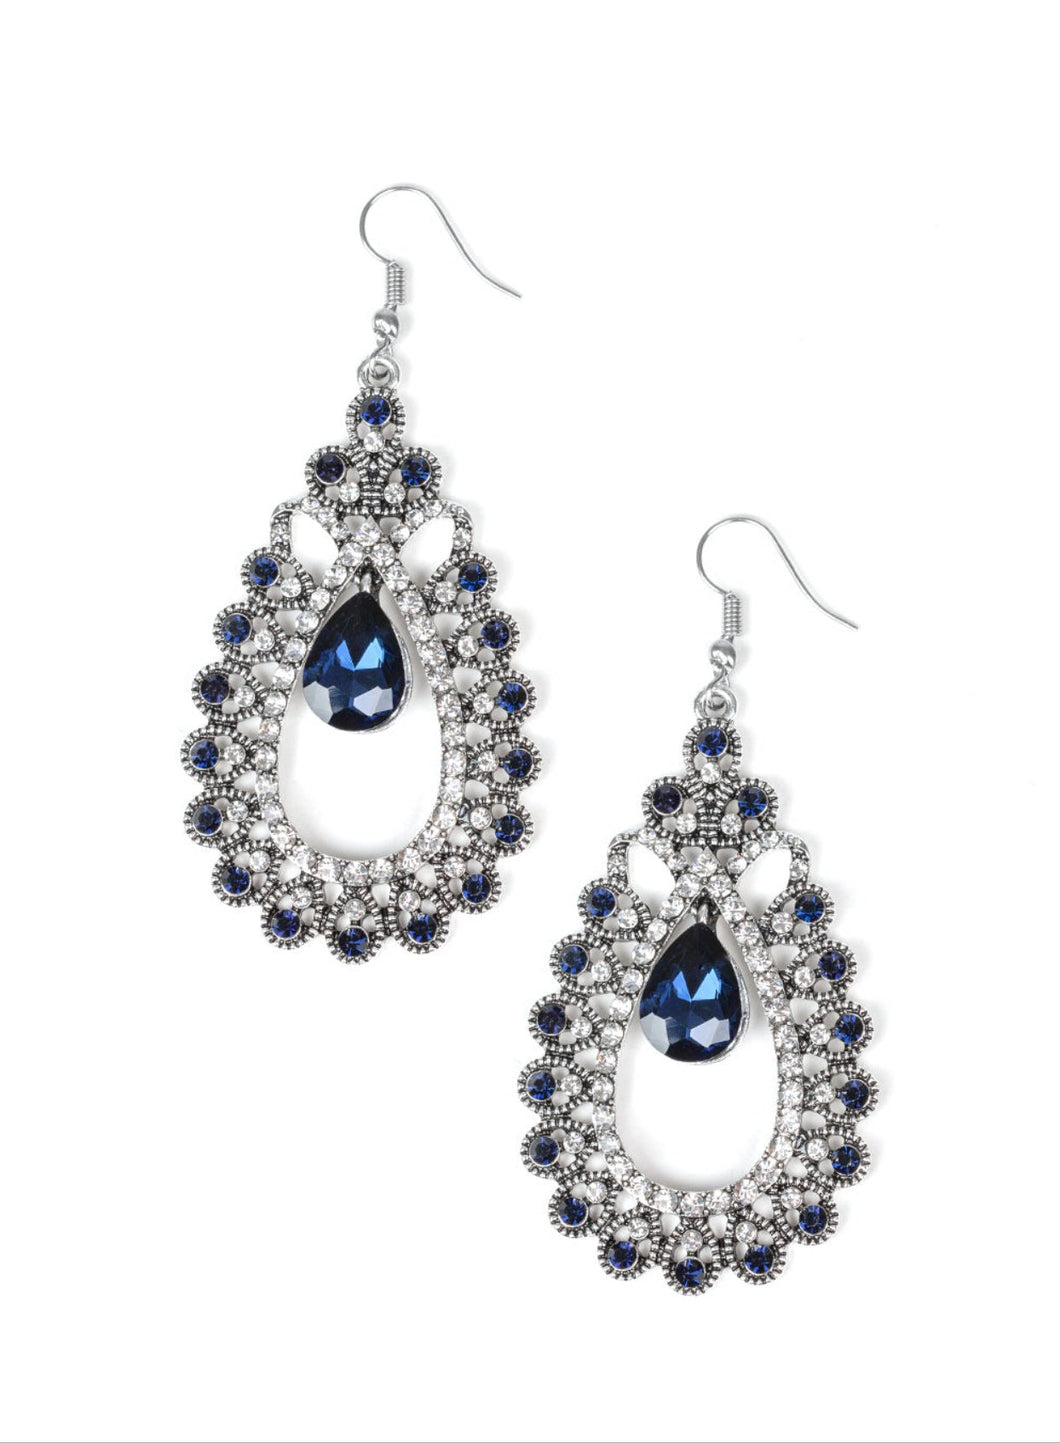 All About Business Blue Earrings